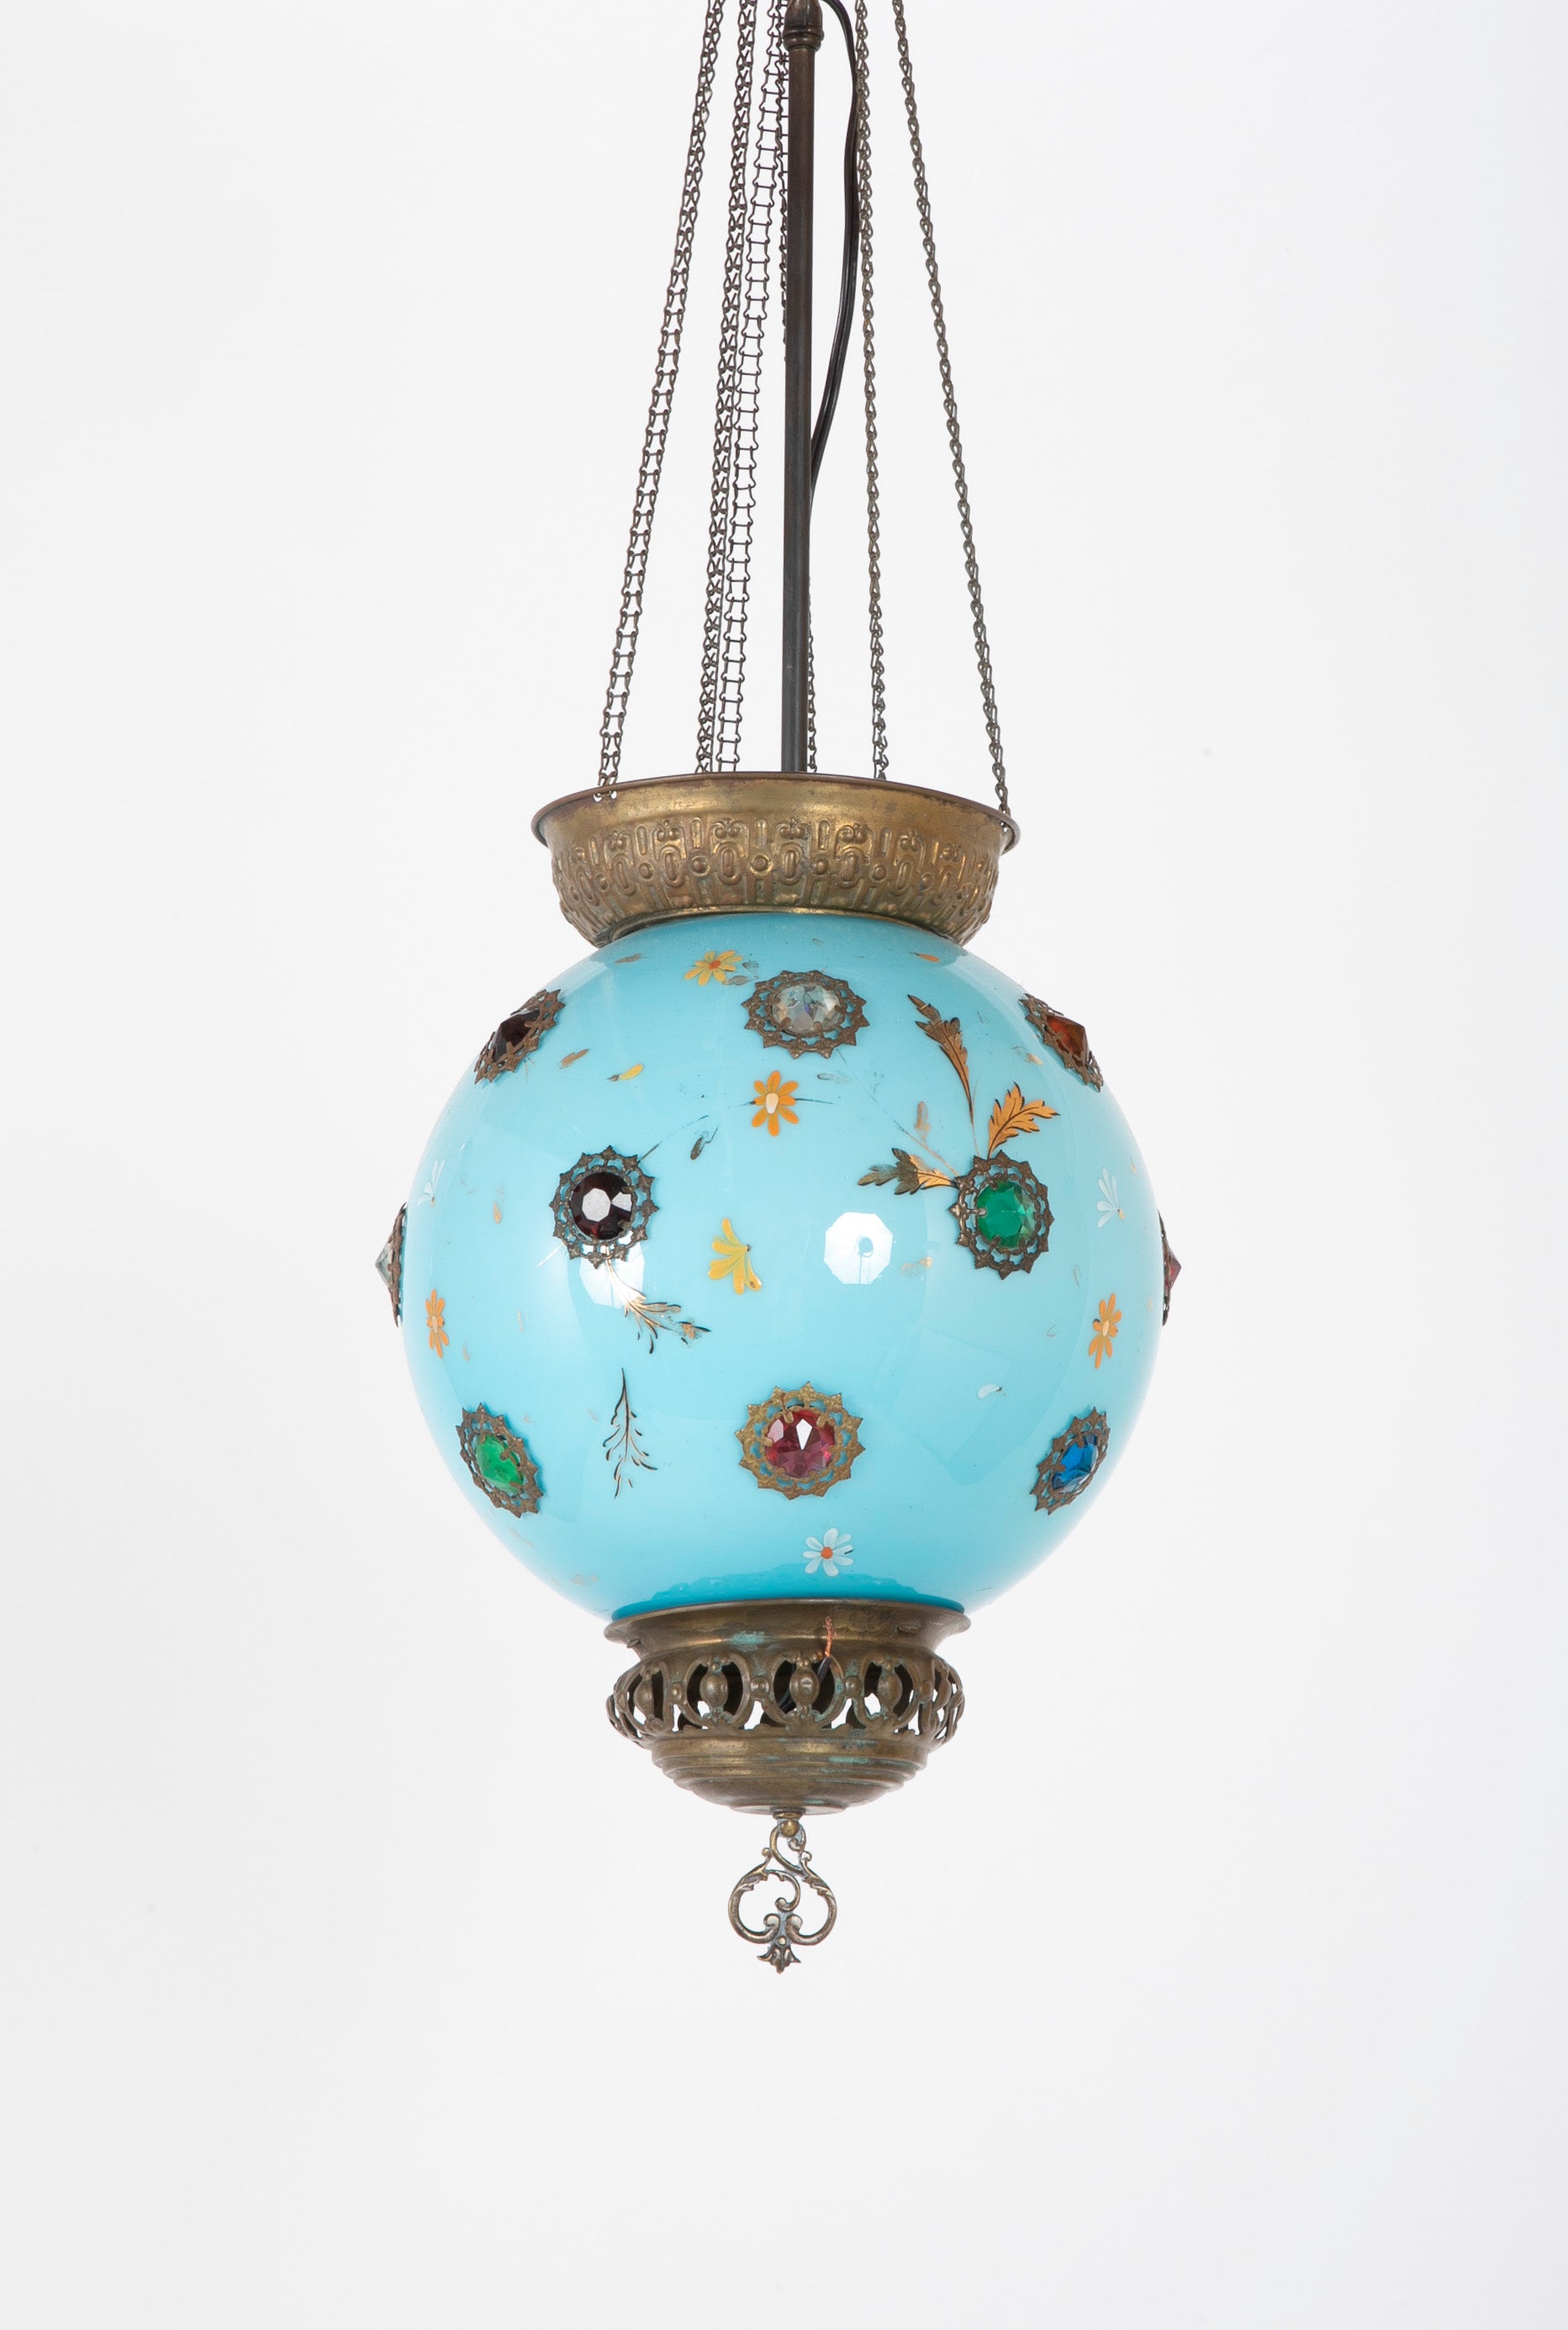 Early 20th Century Turquoise Bohemian Glass Pendant Light